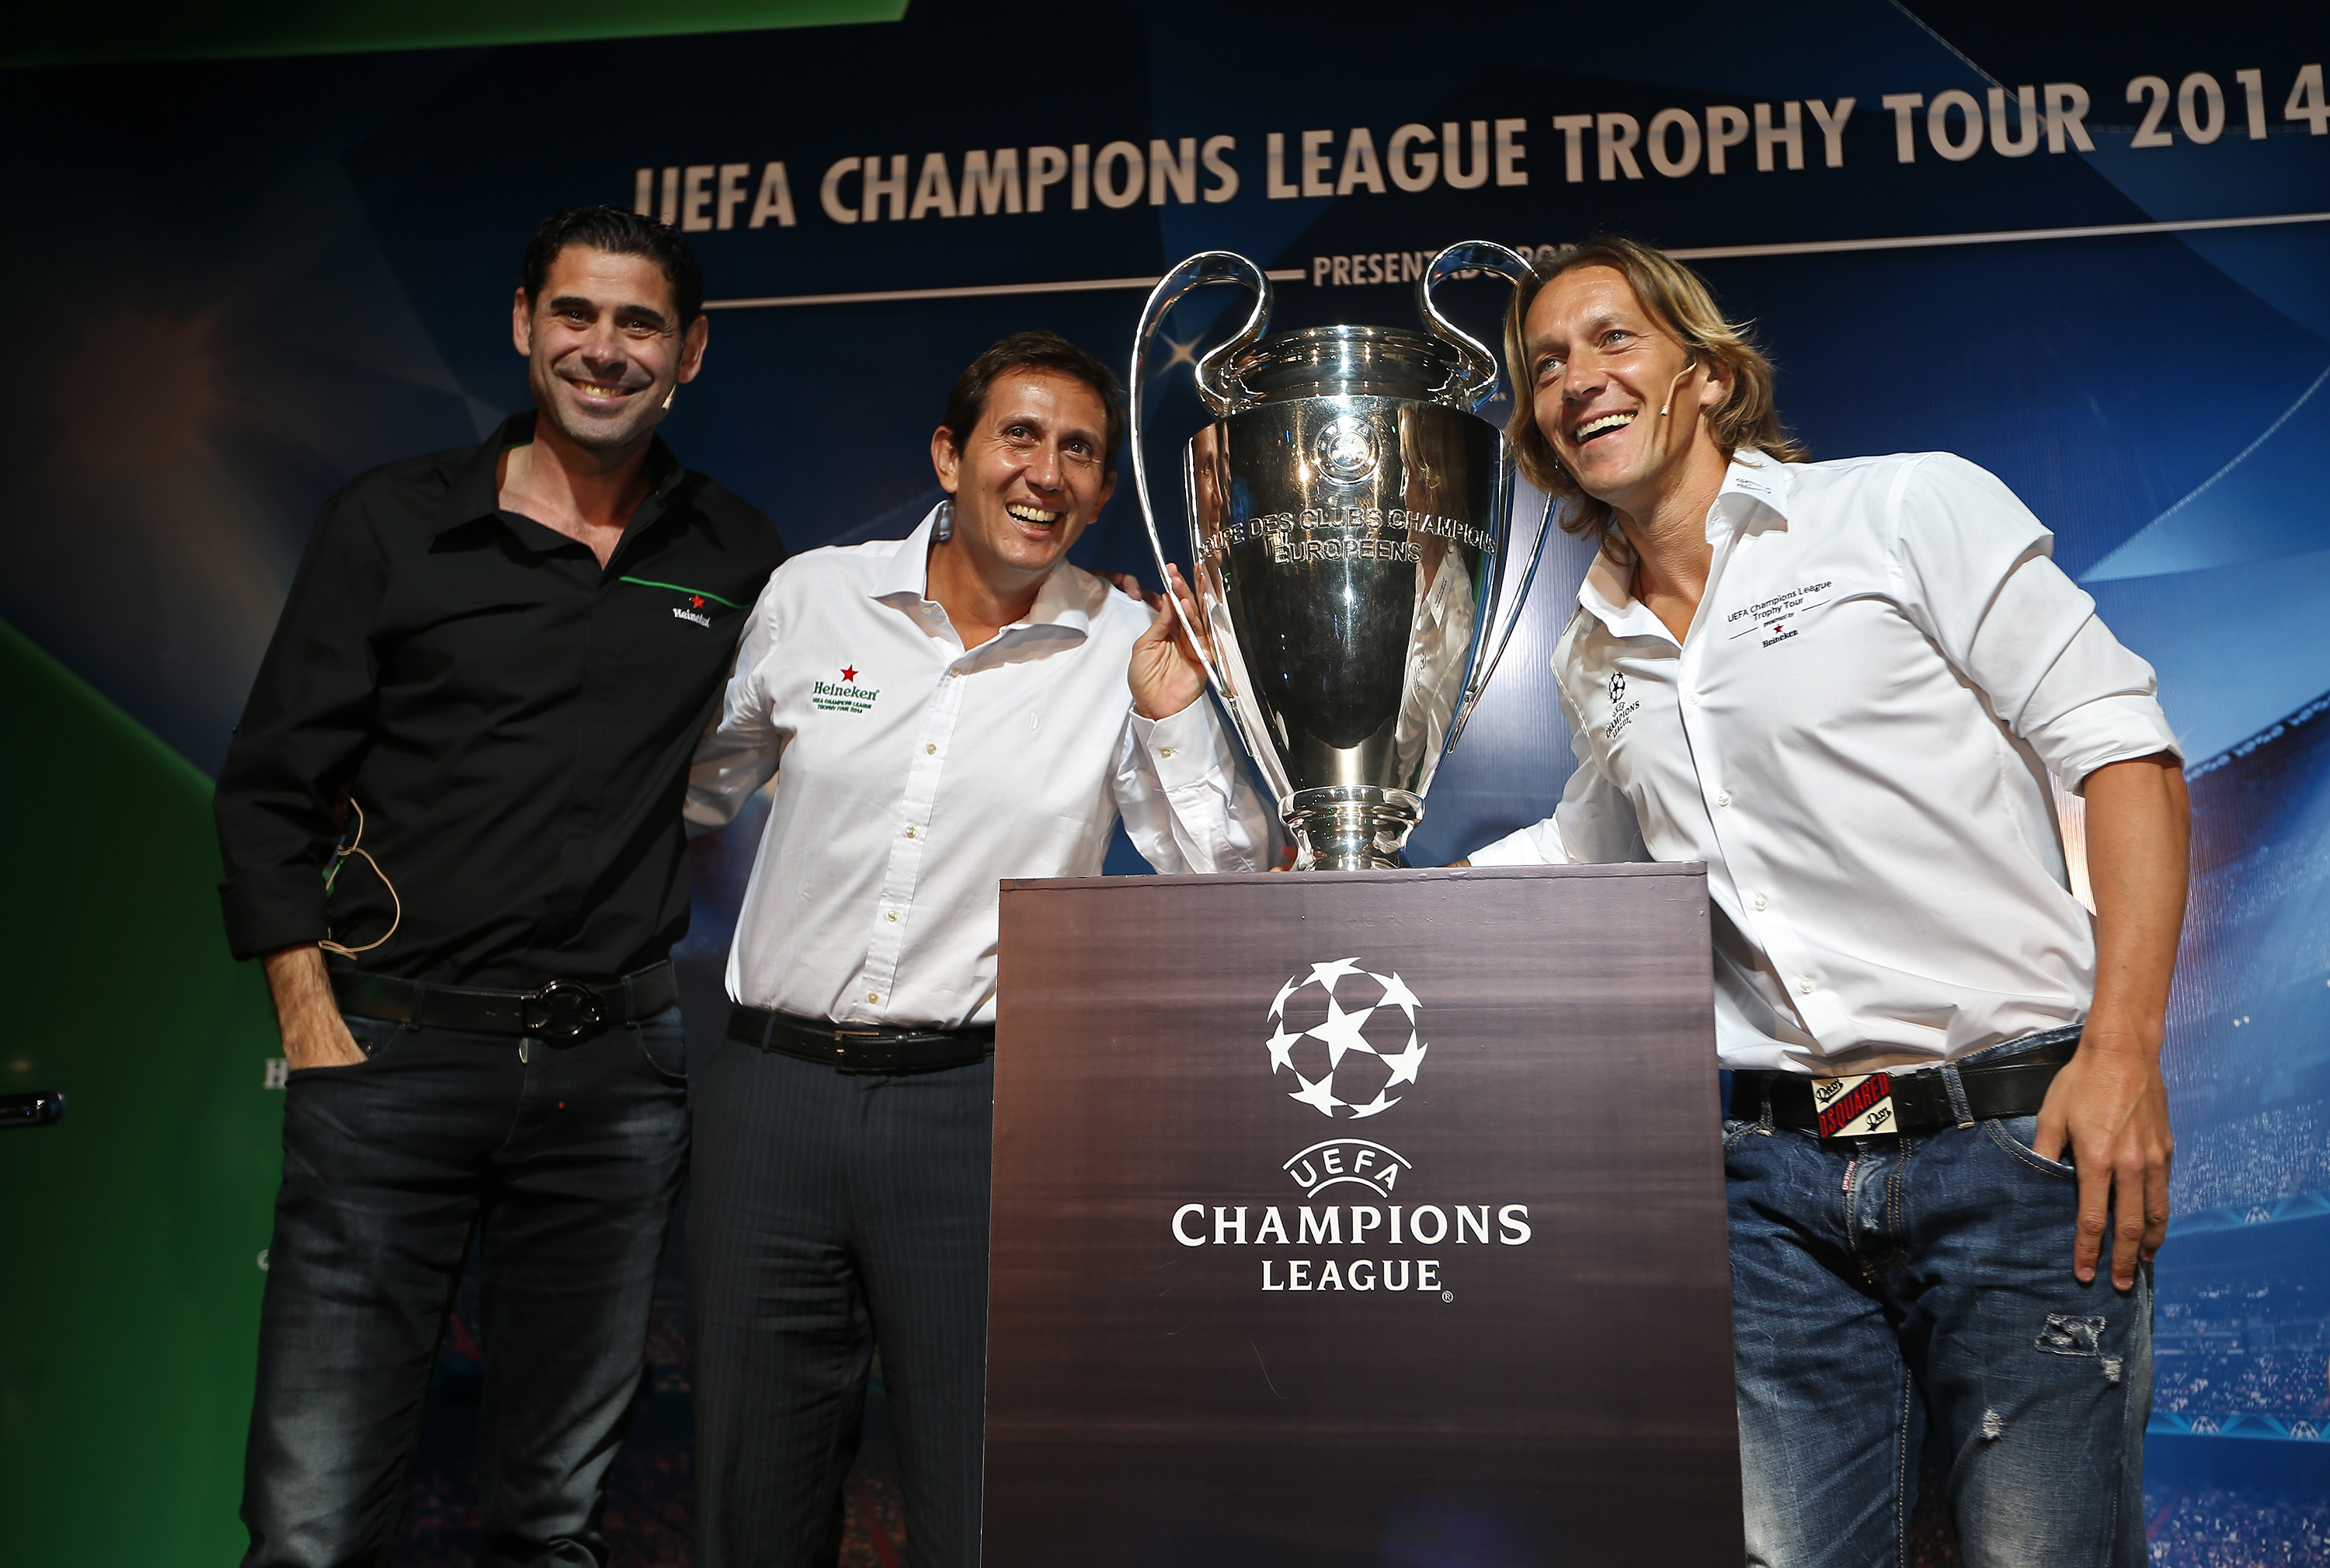 Argentine journalist Juan Pablo Varsky (center), Fernando Hierro (L) and Michel Salgado during the UEFA Champions League Trophy tour on February 26, 2014 in Buenos Aires, Argentina.  Photo: Daniel Jayo/Getty Images Latam.